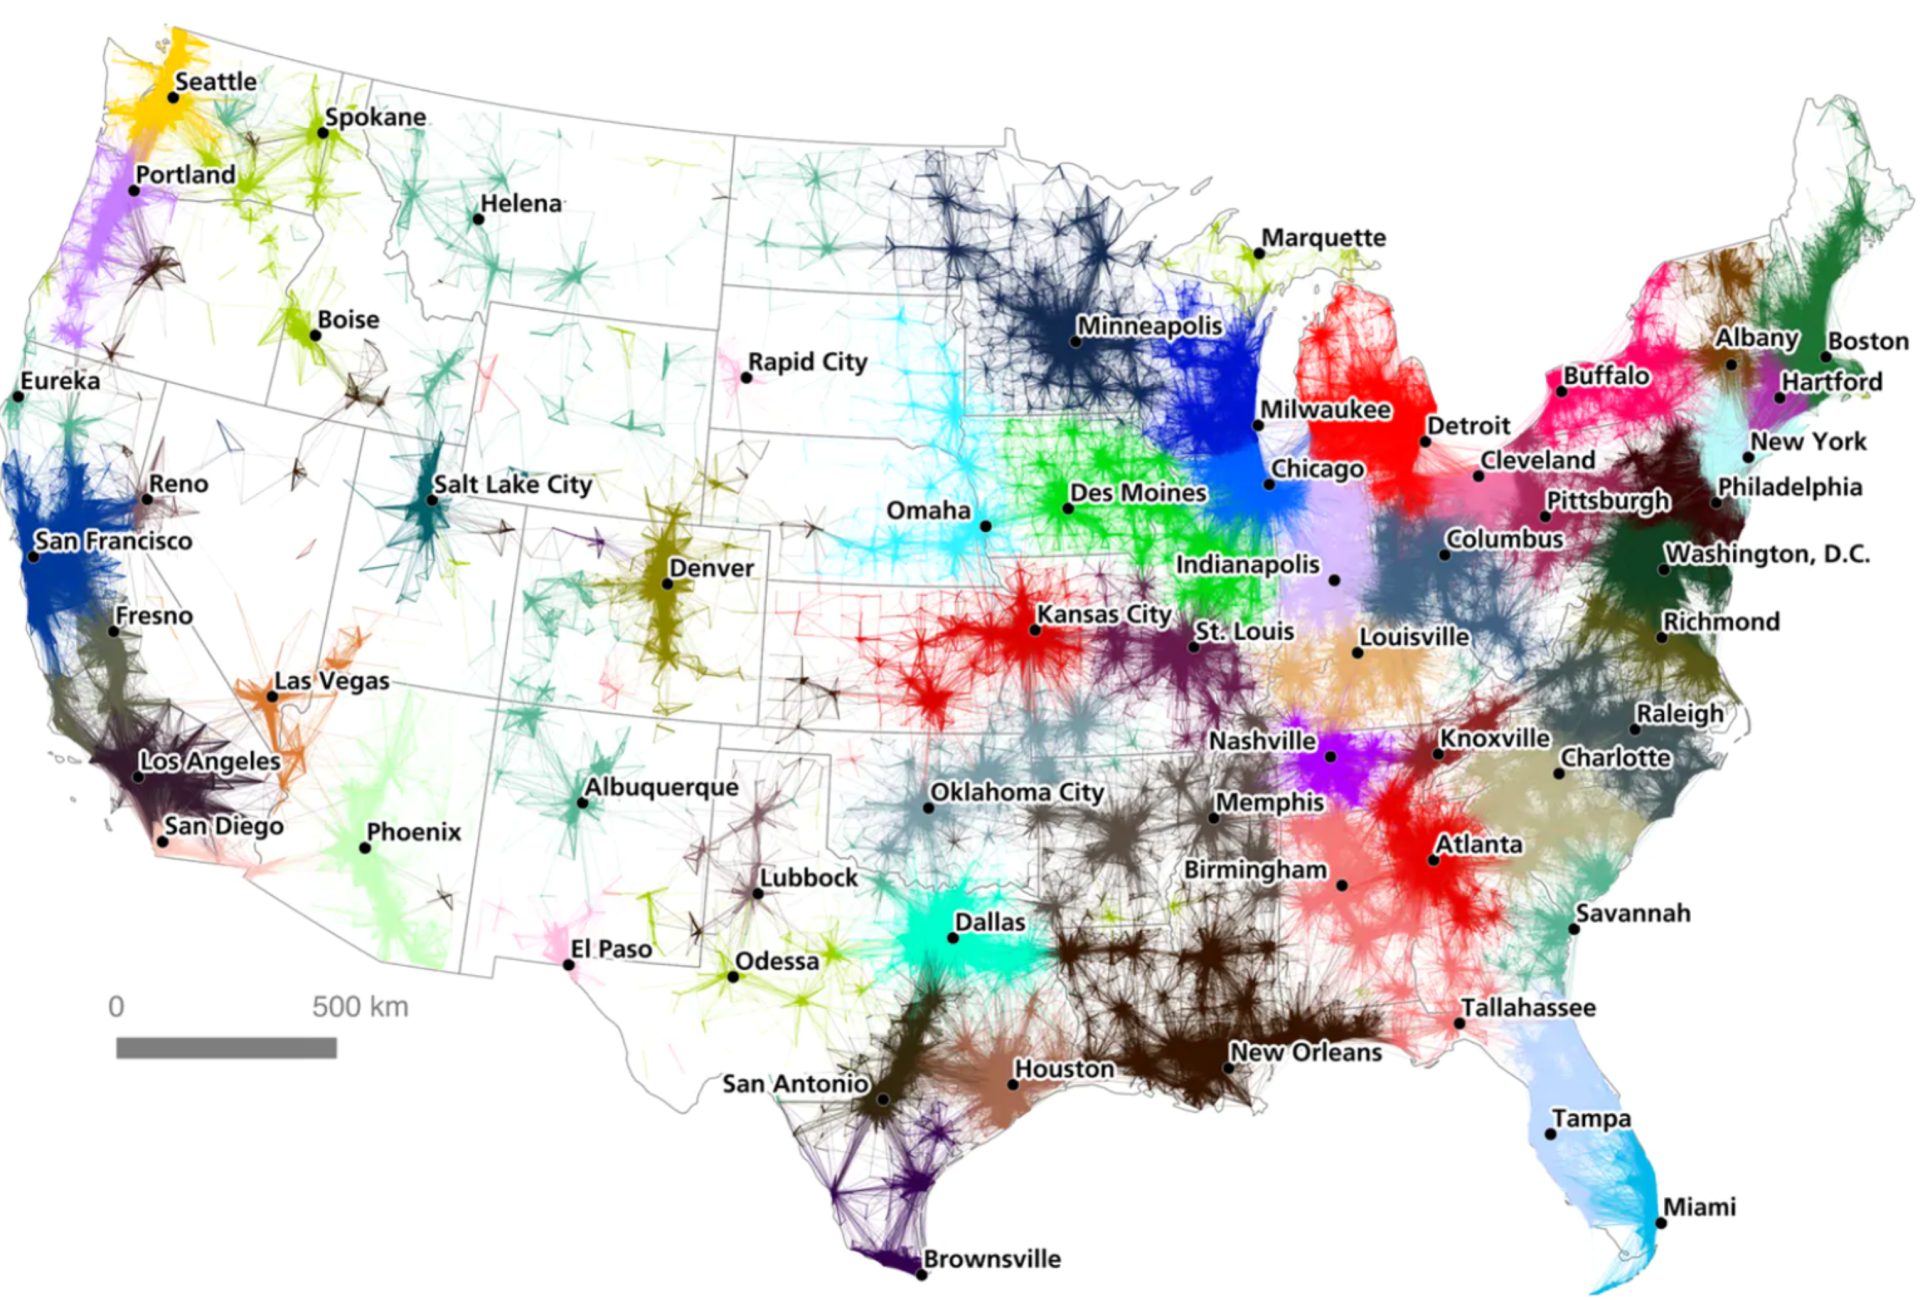 Map of United States Showing Population Density and Transportation Connections